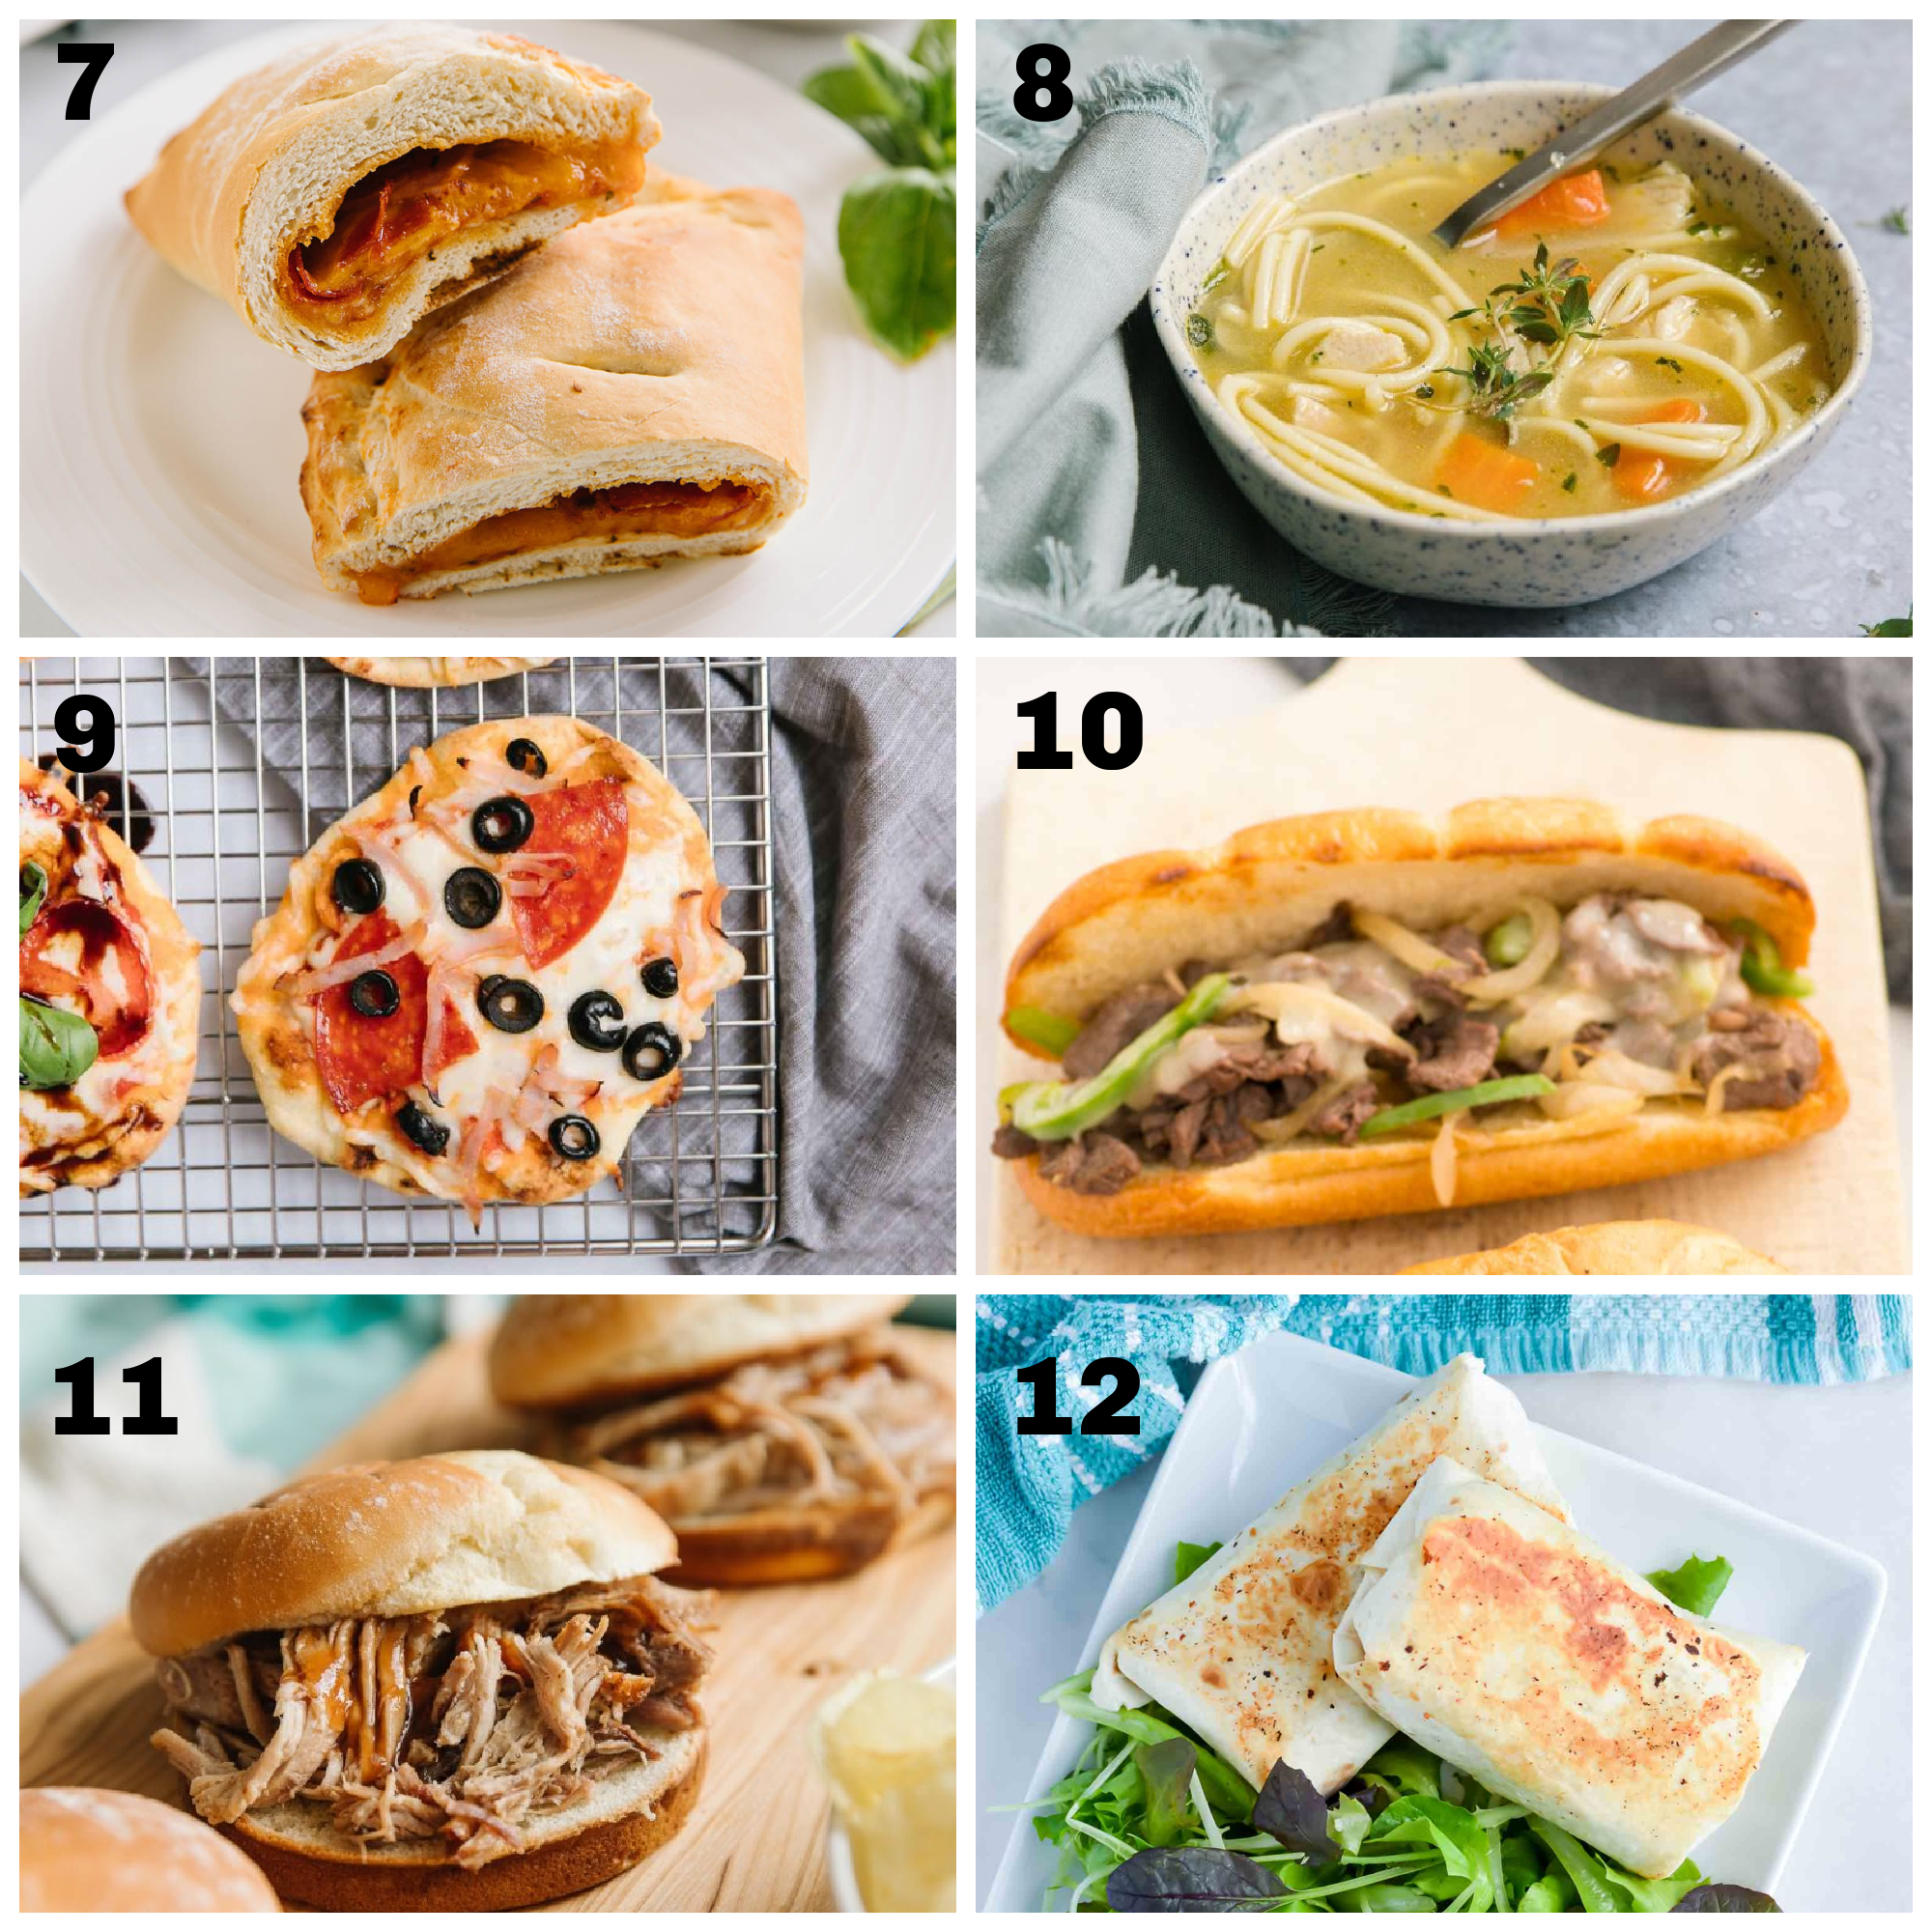 6 dinner ideas for meals for two that are make ahead and freezer-friendly labeled 7-12